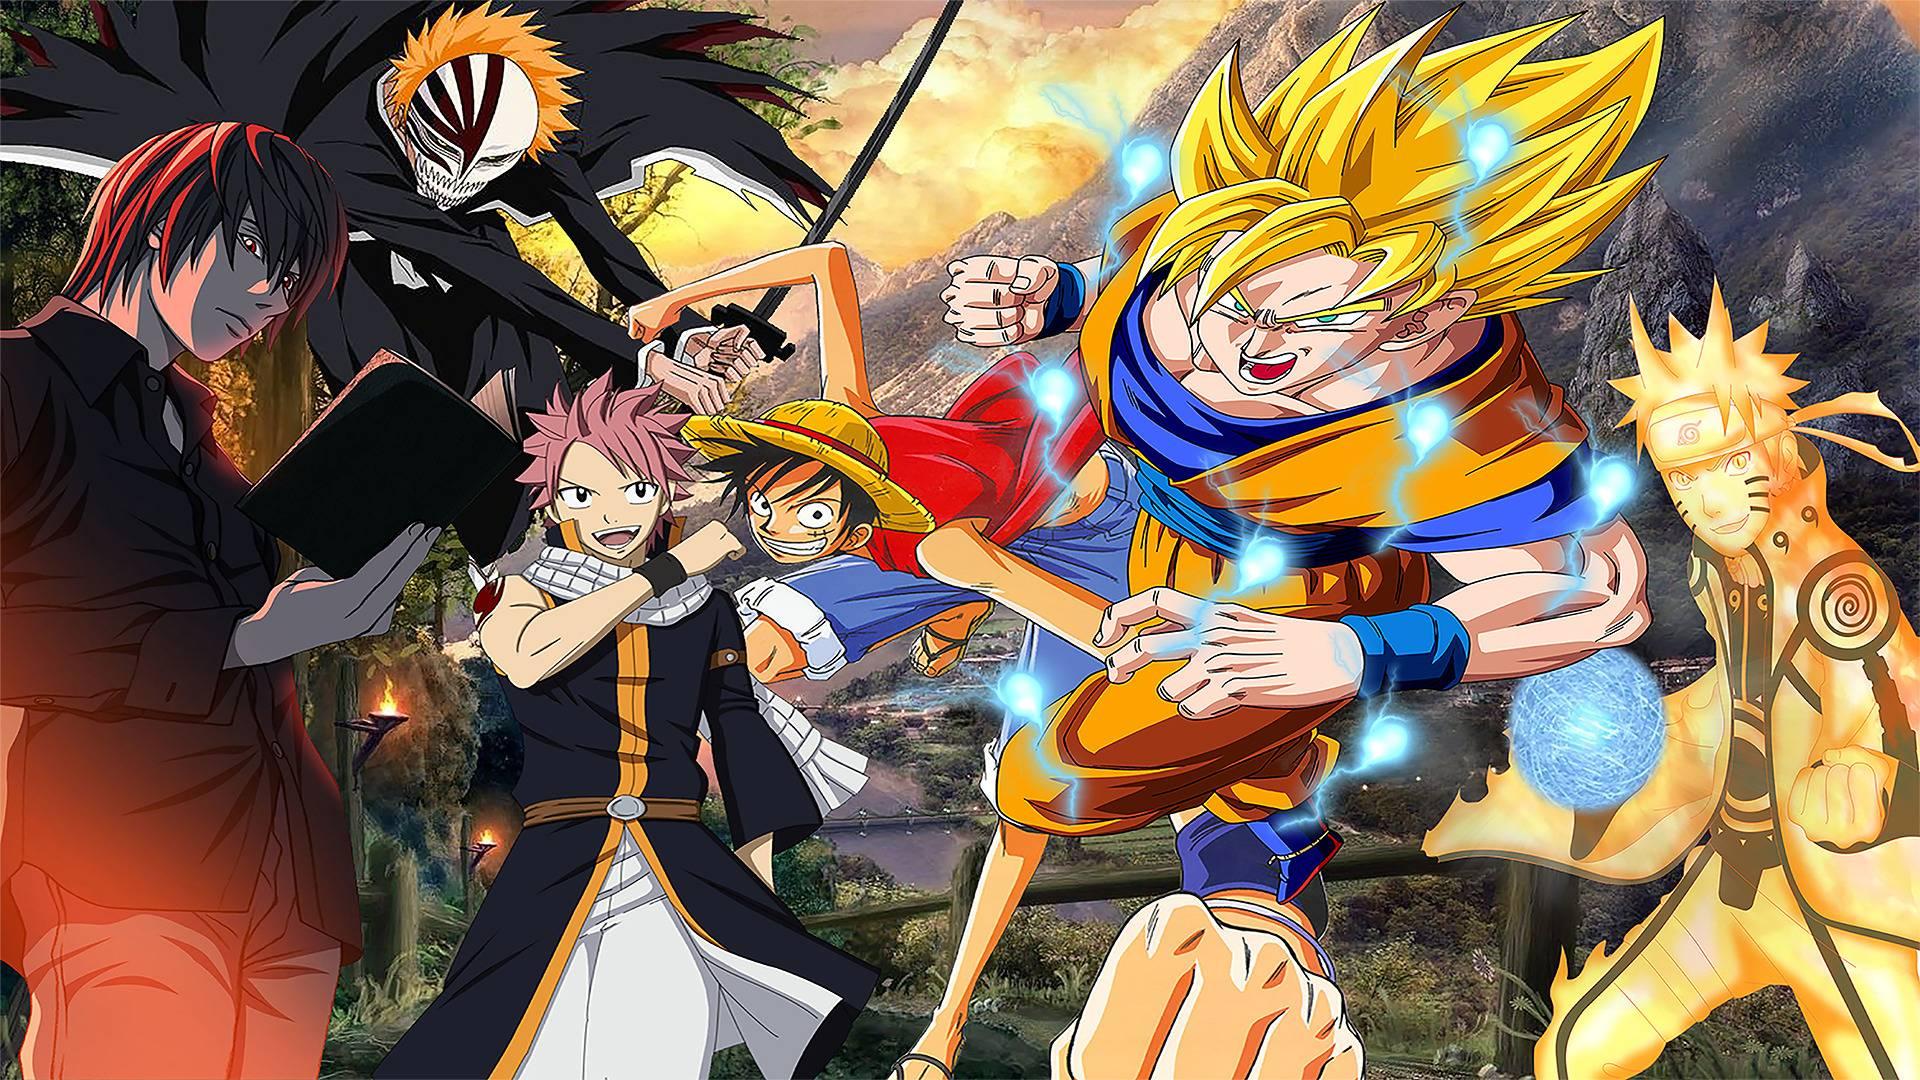 1920 x 1080 · jpeg - Fairy Tail 2015 Wallpapers - Wallpaper Cave